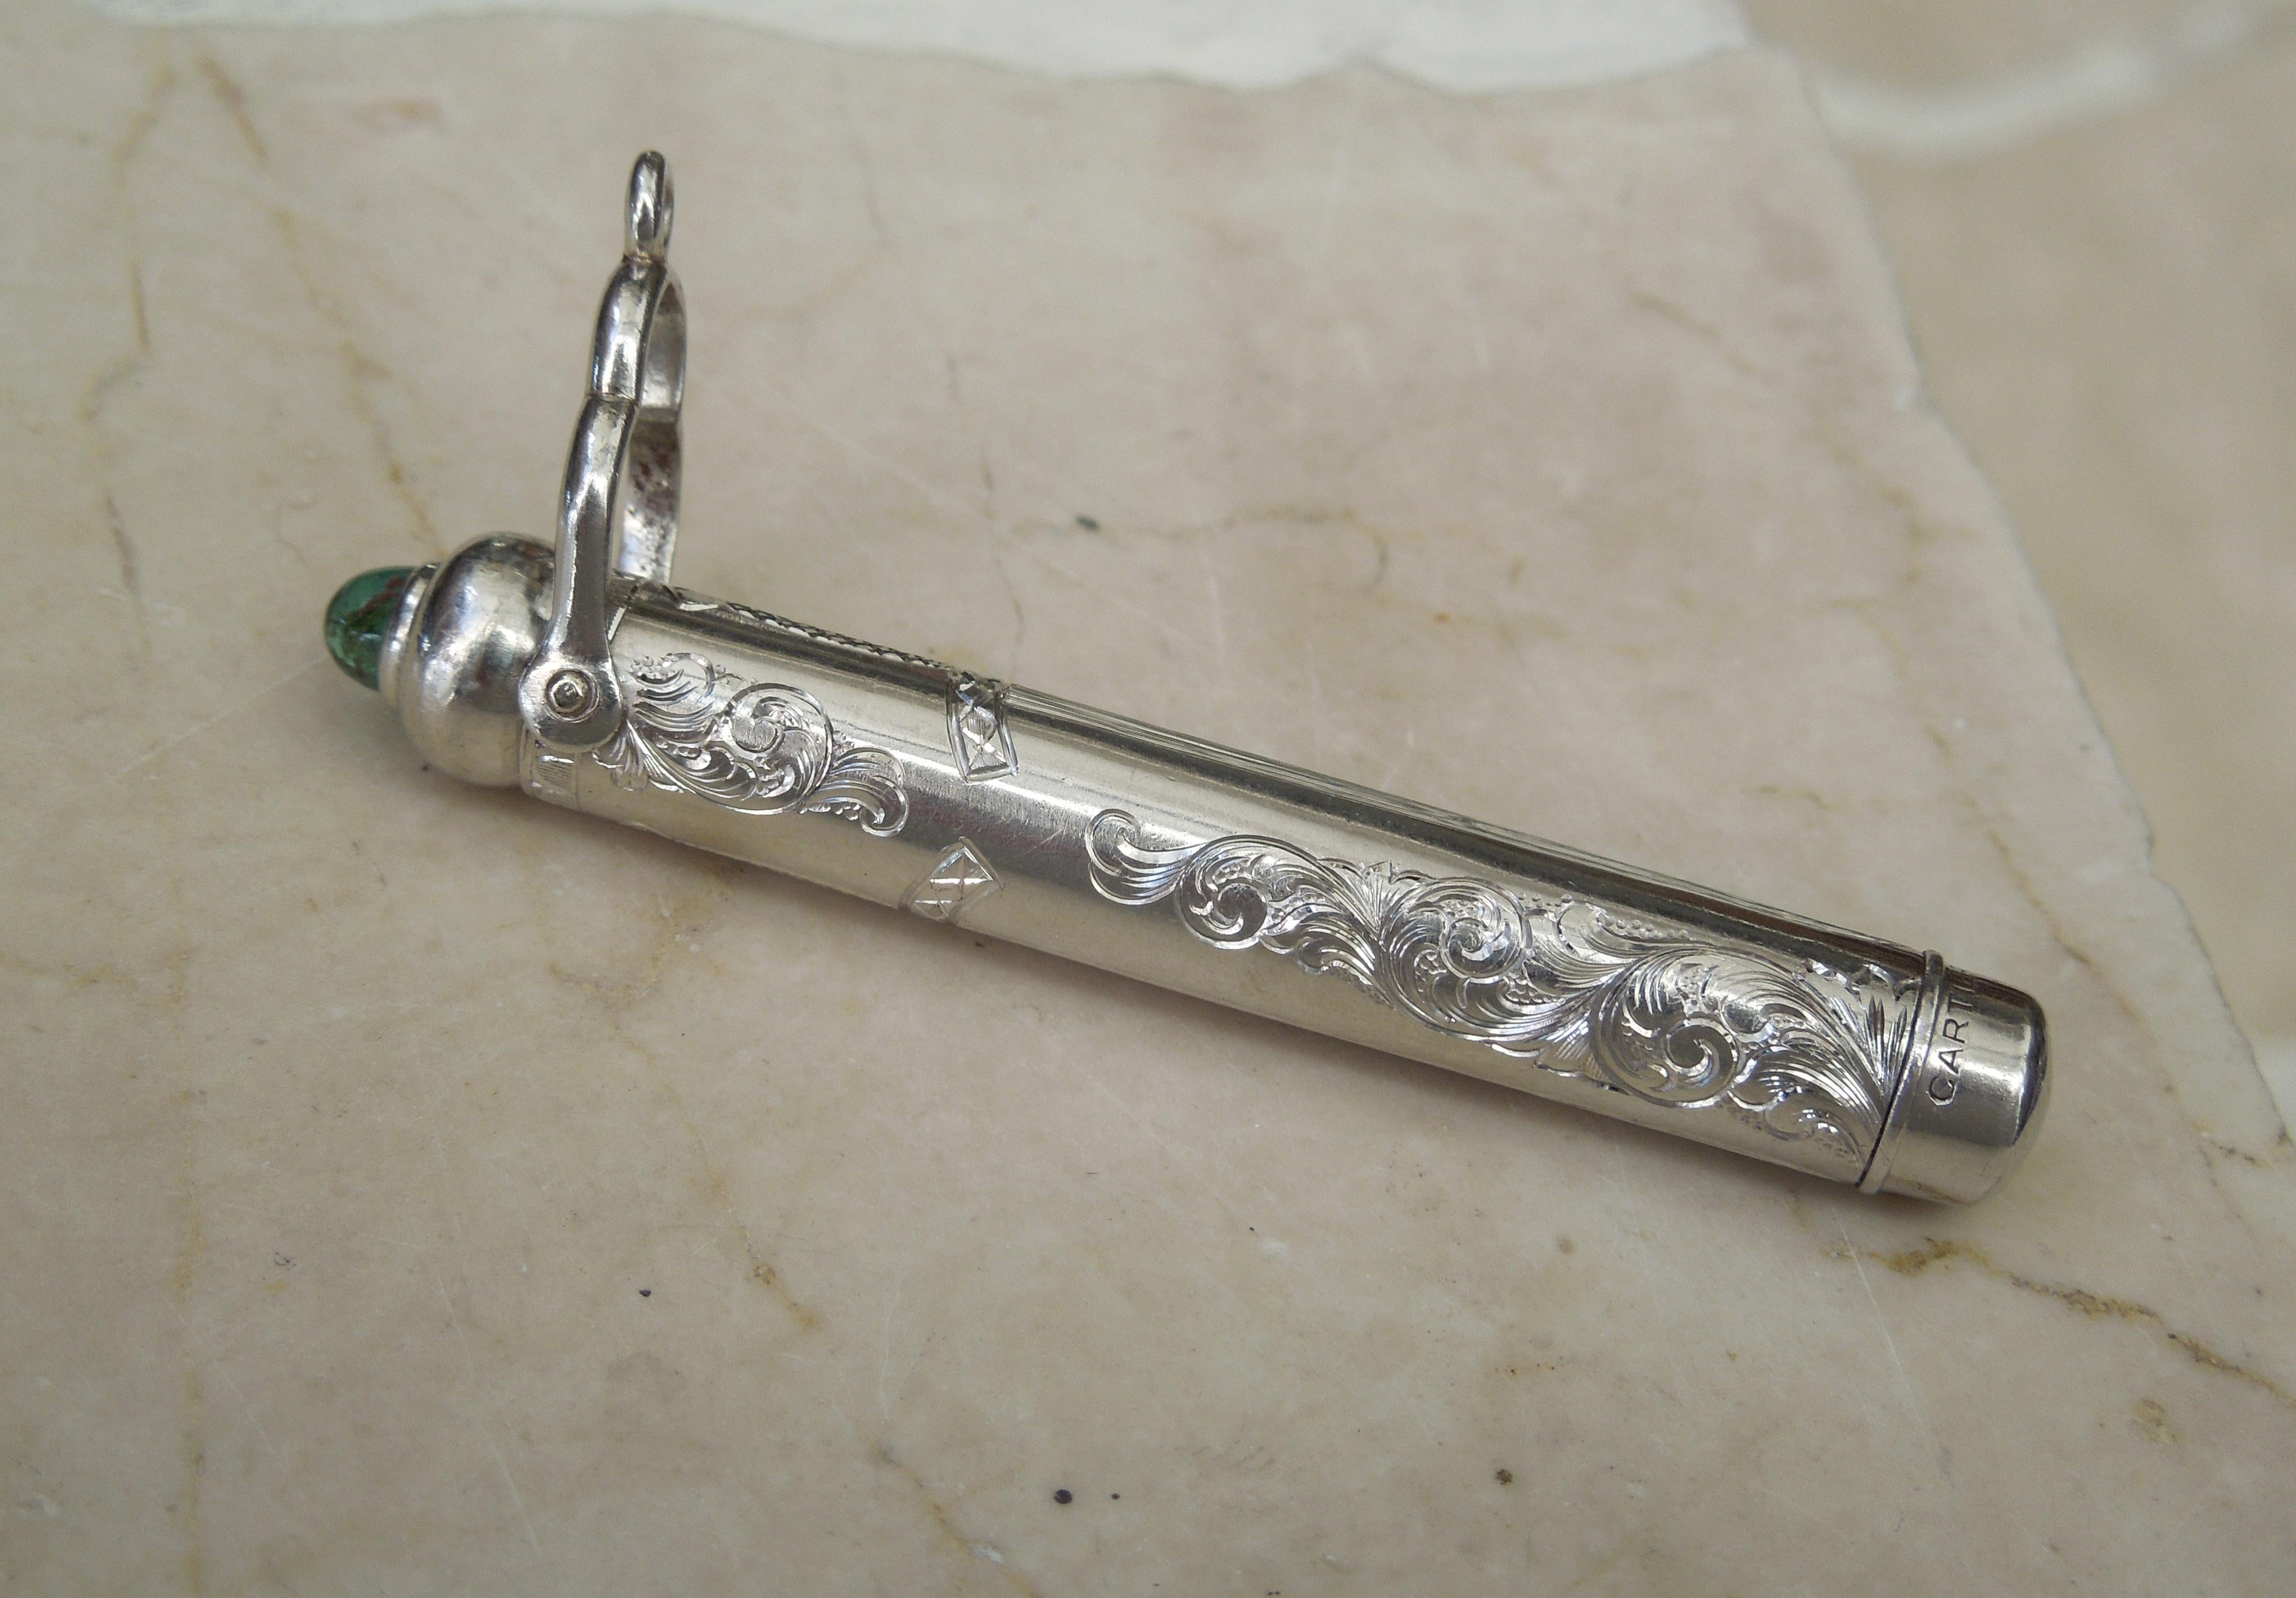 Constructed completely of Platinum - Accented with Custom Personalized exceptionally detailed Hand Engraving throughout in Scroll designs as well as an intricately detailed Sword on each side.
*We do guarantee that the piece is constructed of the